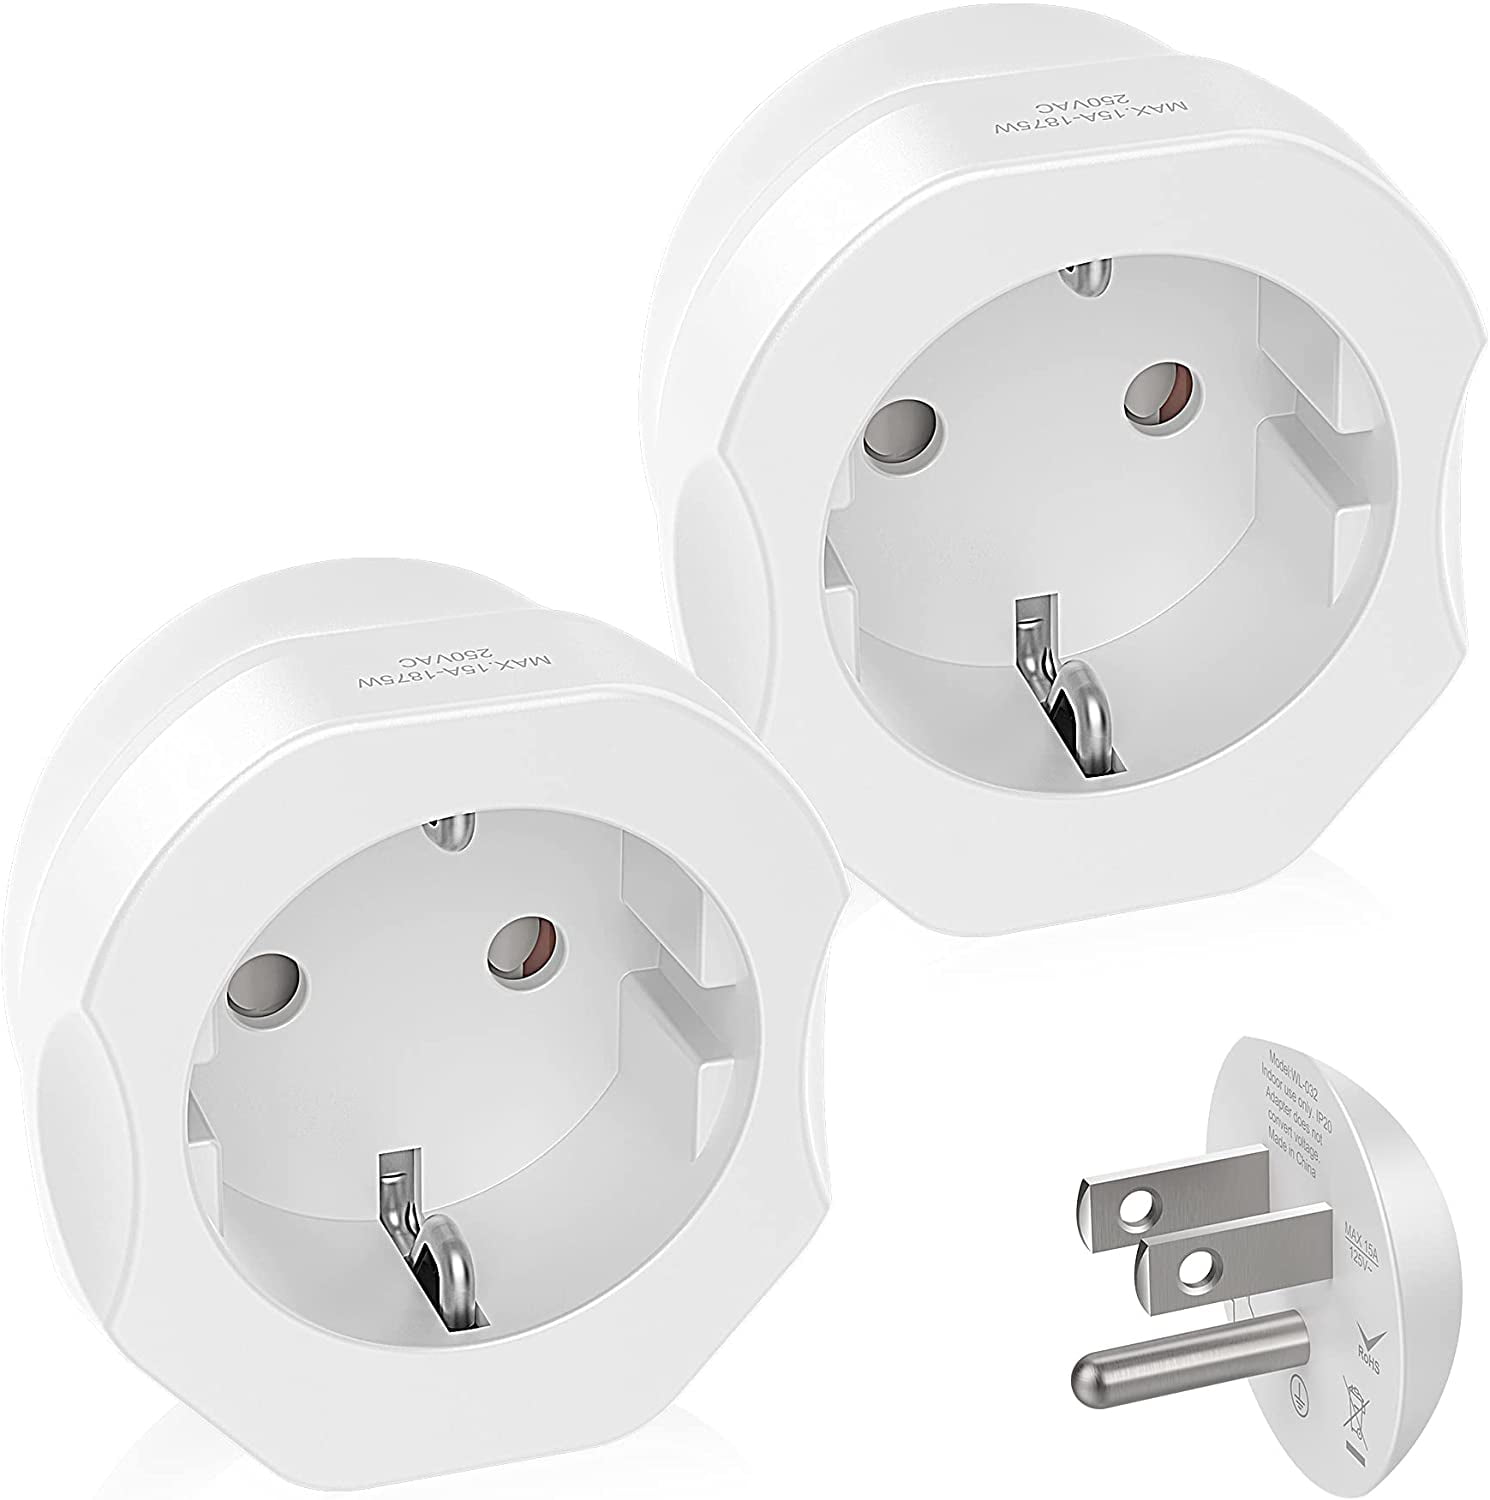 Details about   Europe To US Type 6 Plug To Type A Electrical Adaptor 